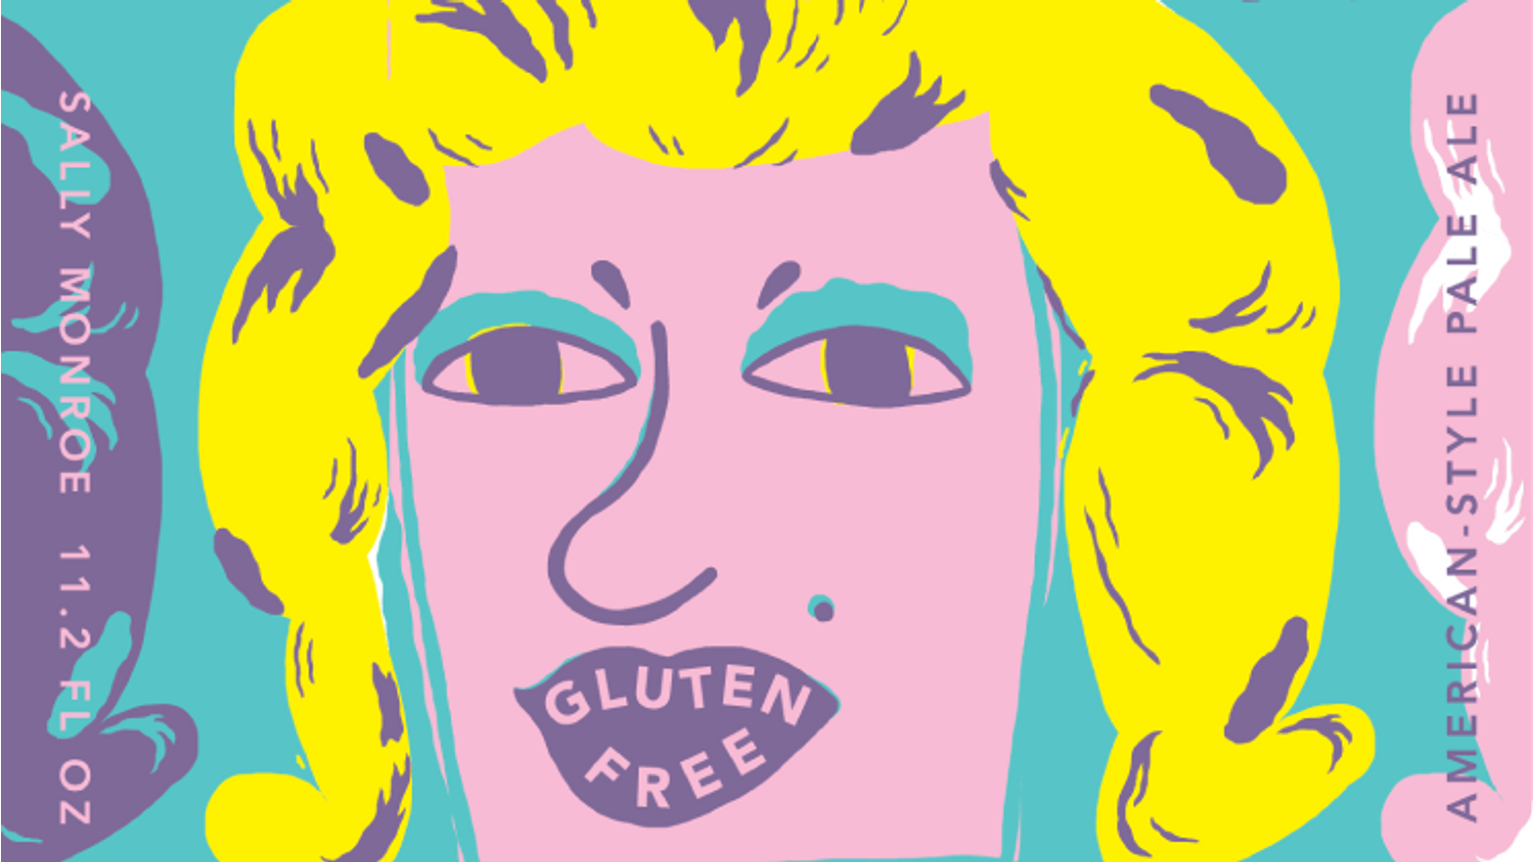 thumbnail for blog article named: Gluten-Free Beers - Making Craft Beer even more accessible